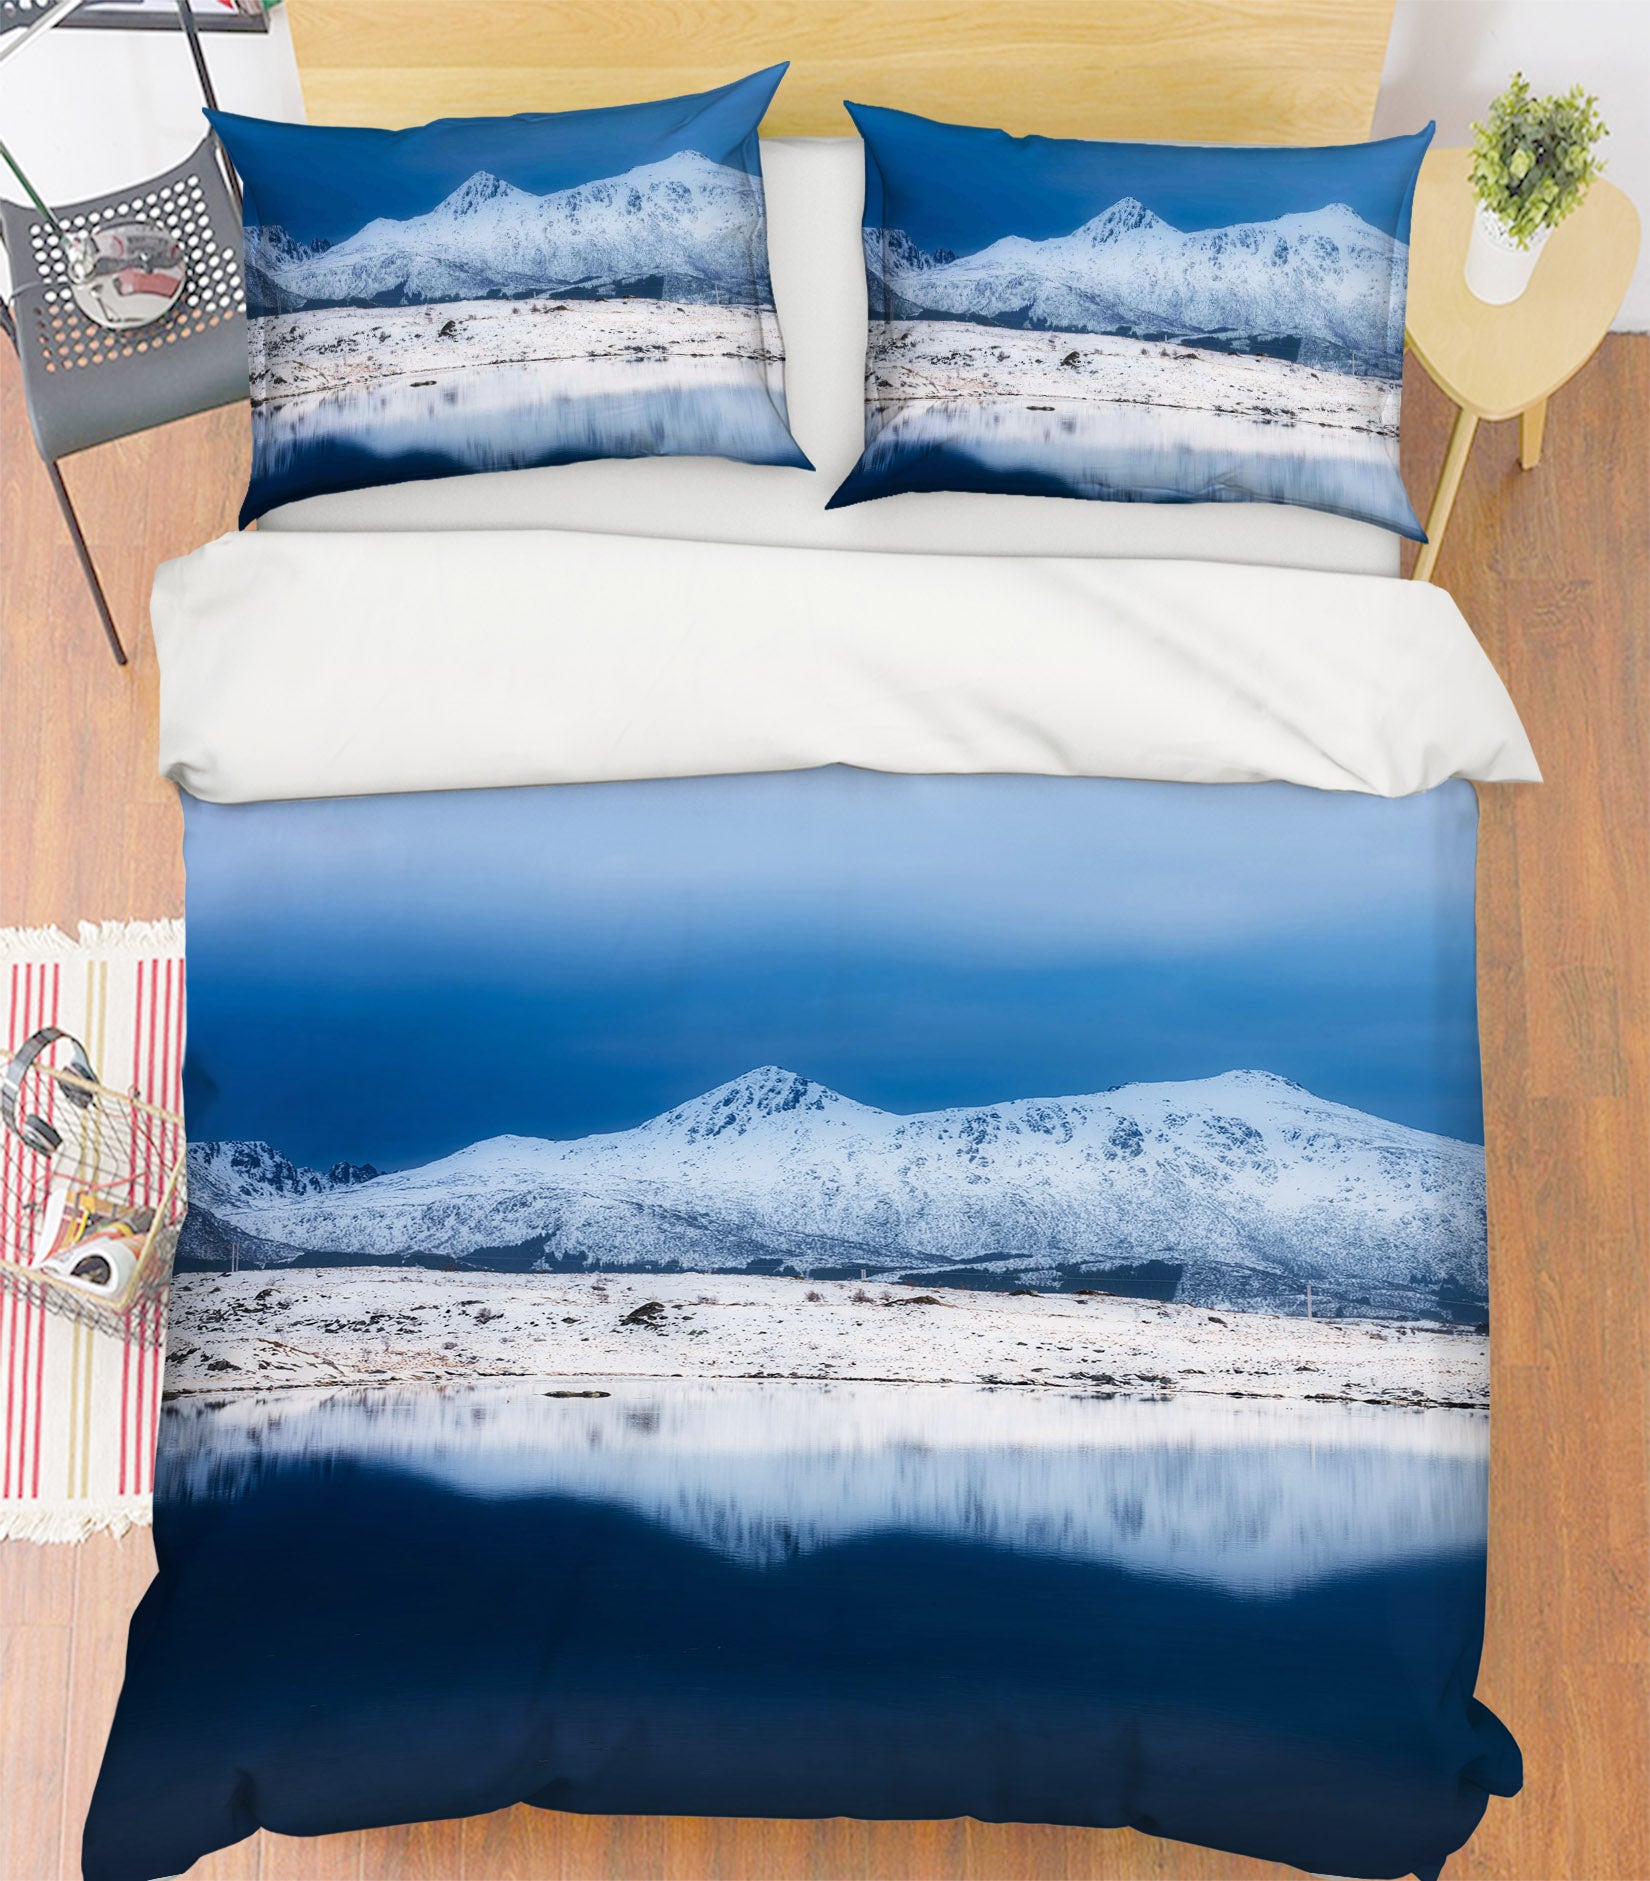 3D Snow Mountain 2160 Marco Carmassi Bedding Bed Pillowcases Quilt